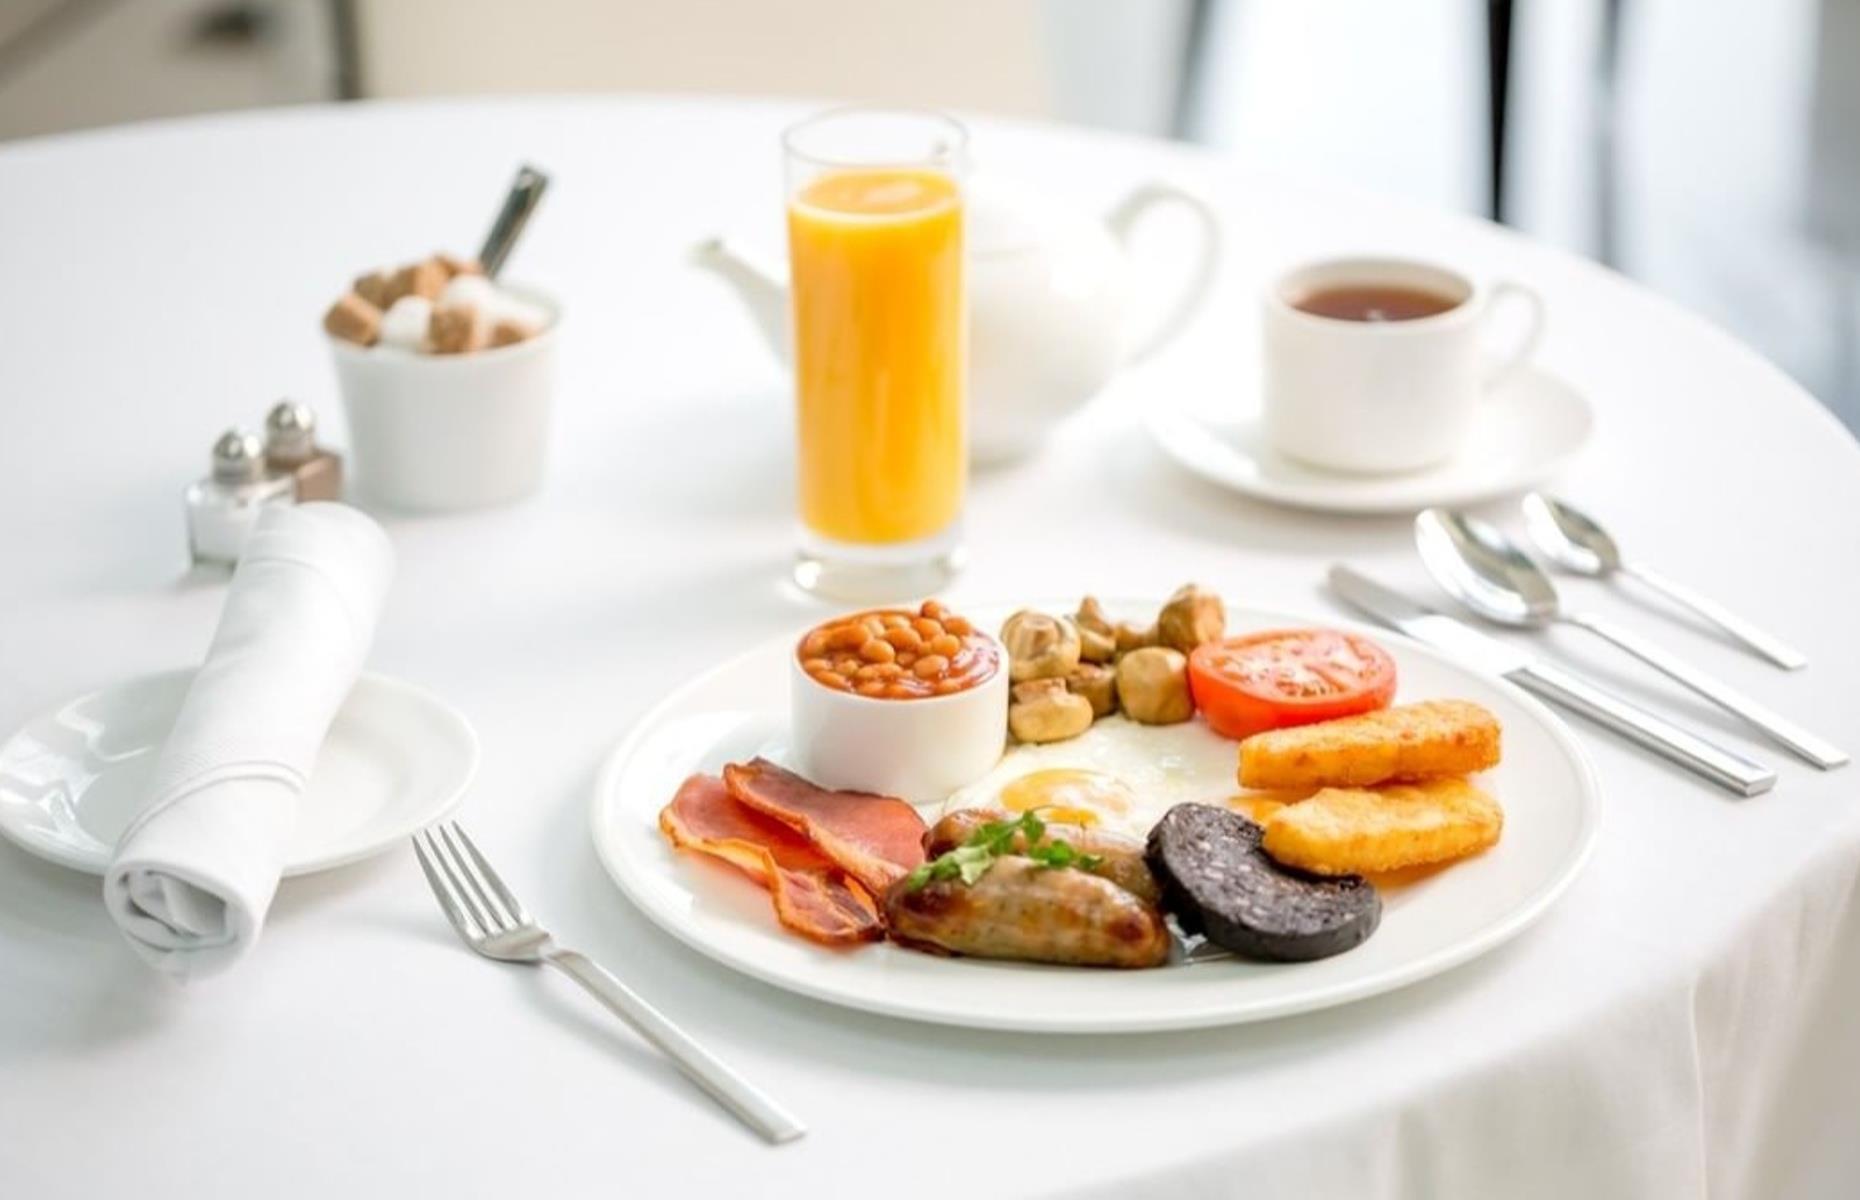 <p>To be one of the best hotel breakfast in the business, you really need to master the holy trinity: a plentiful selection, quality ingredients and exceptional service. The <a href="https://www.parkplazawestminsterbridge.com/">Park Plaza Westminster Bridge</a>, which sits across the River Thames from Big Ben, has this down to a fine art. Guests waxing lyrical about the lovely staff and the diverse menu choice. There’s not only a continental buffet to wrap your chops around, but several cooking stations offering pancakes, omelets and waffles, as well as a team of friendly chefs ready to make your eggs to order.</p>  <p><a href="https://www.loveexploring.com/galleries/113458/the-worlds-25-best-hotels?page=1"><strong>Now take a look at the world's 25 best hotels</strong></a></p>